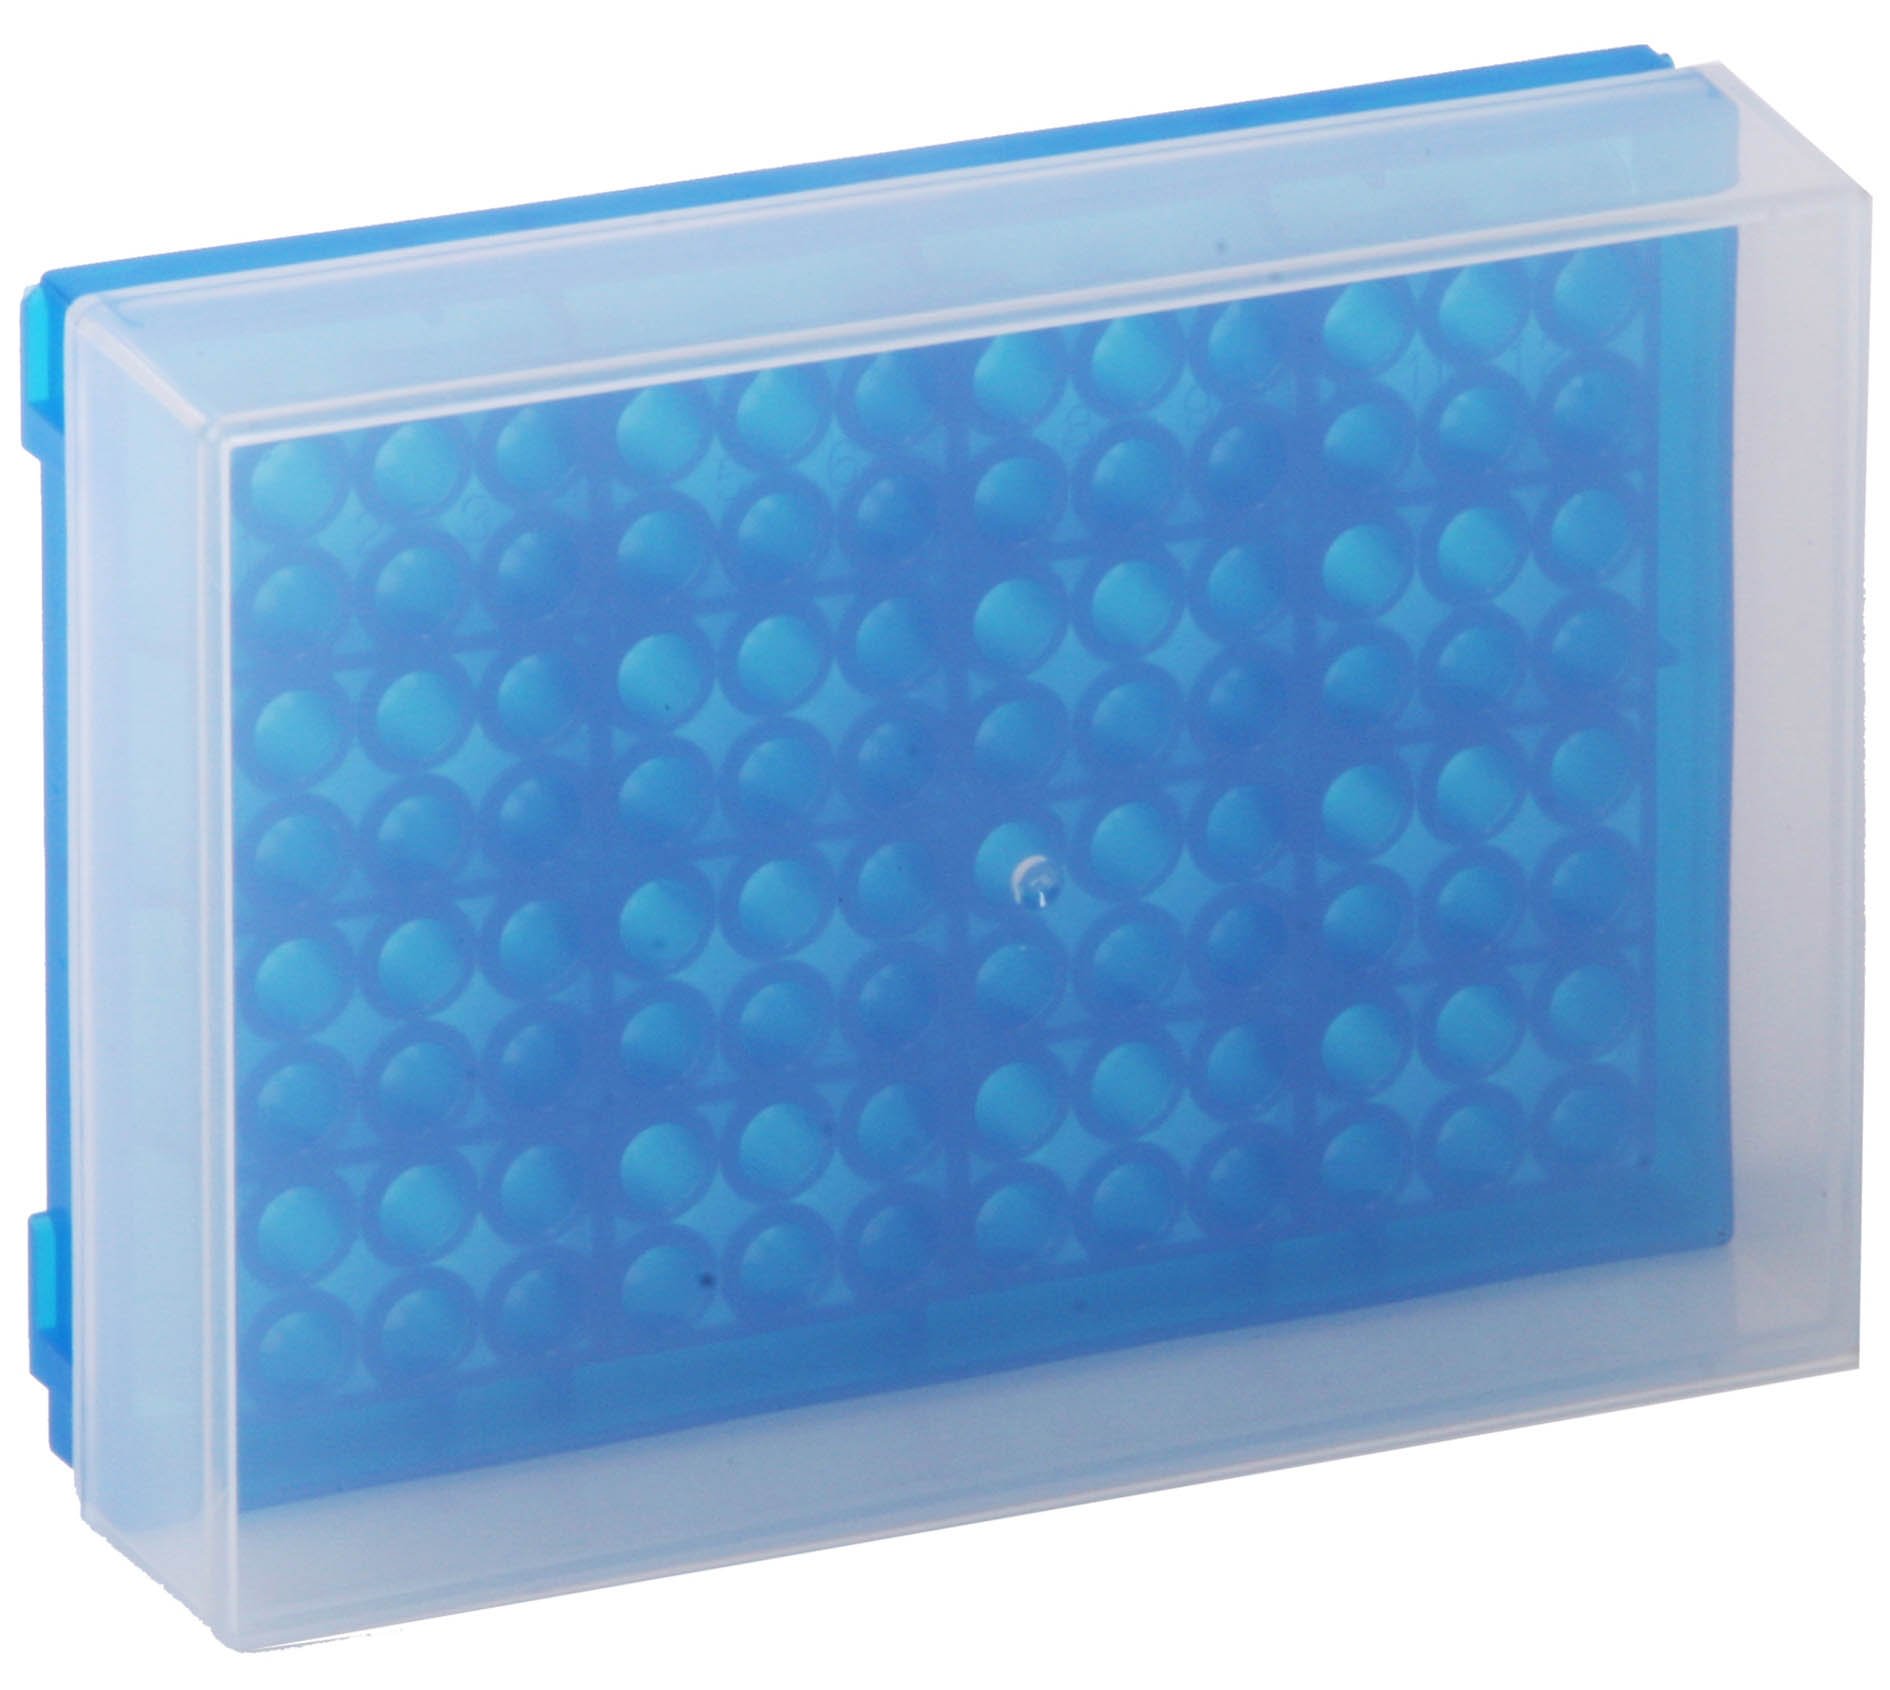 96-Well Preparation Rack with Cover - Fluorescent Blue